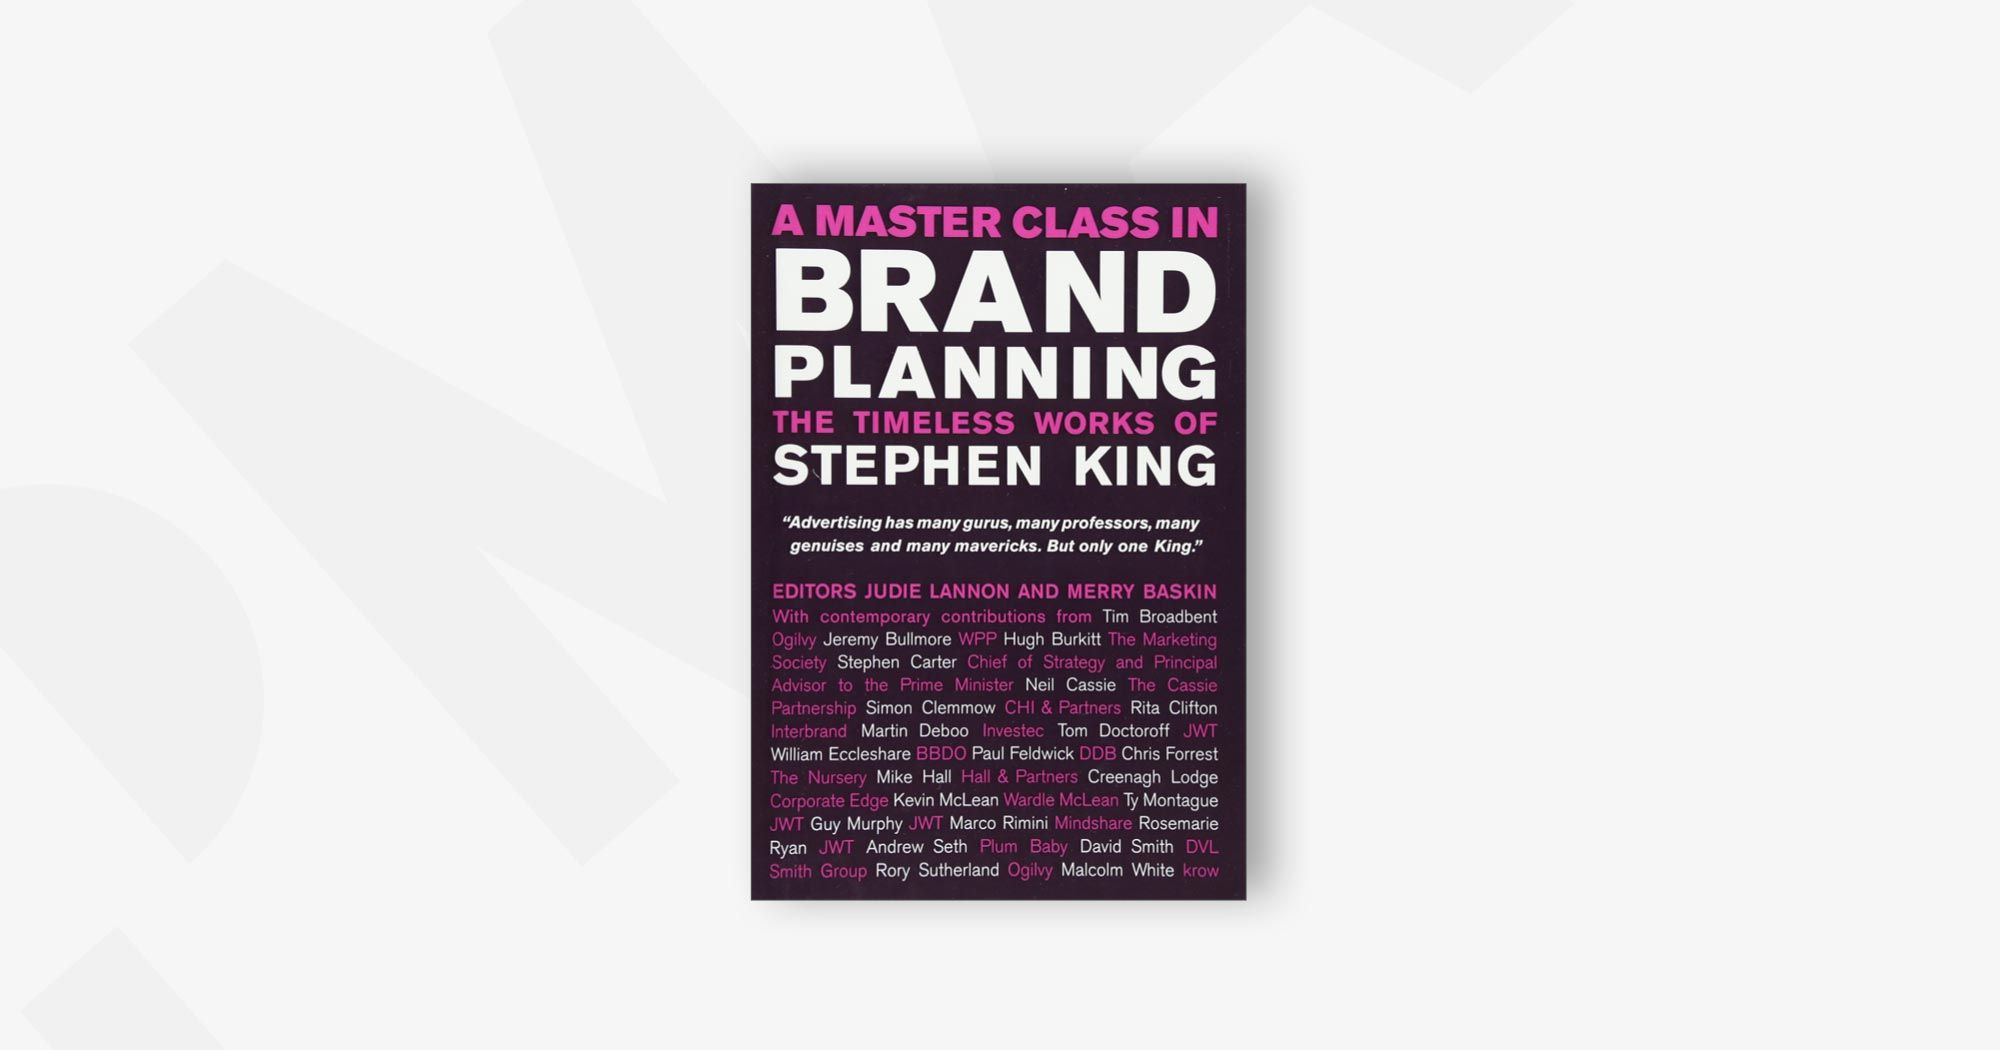 A Master Class in Brand Planning: The Timeless Works of Stephen King – Judie Lannon and Merry Baskin